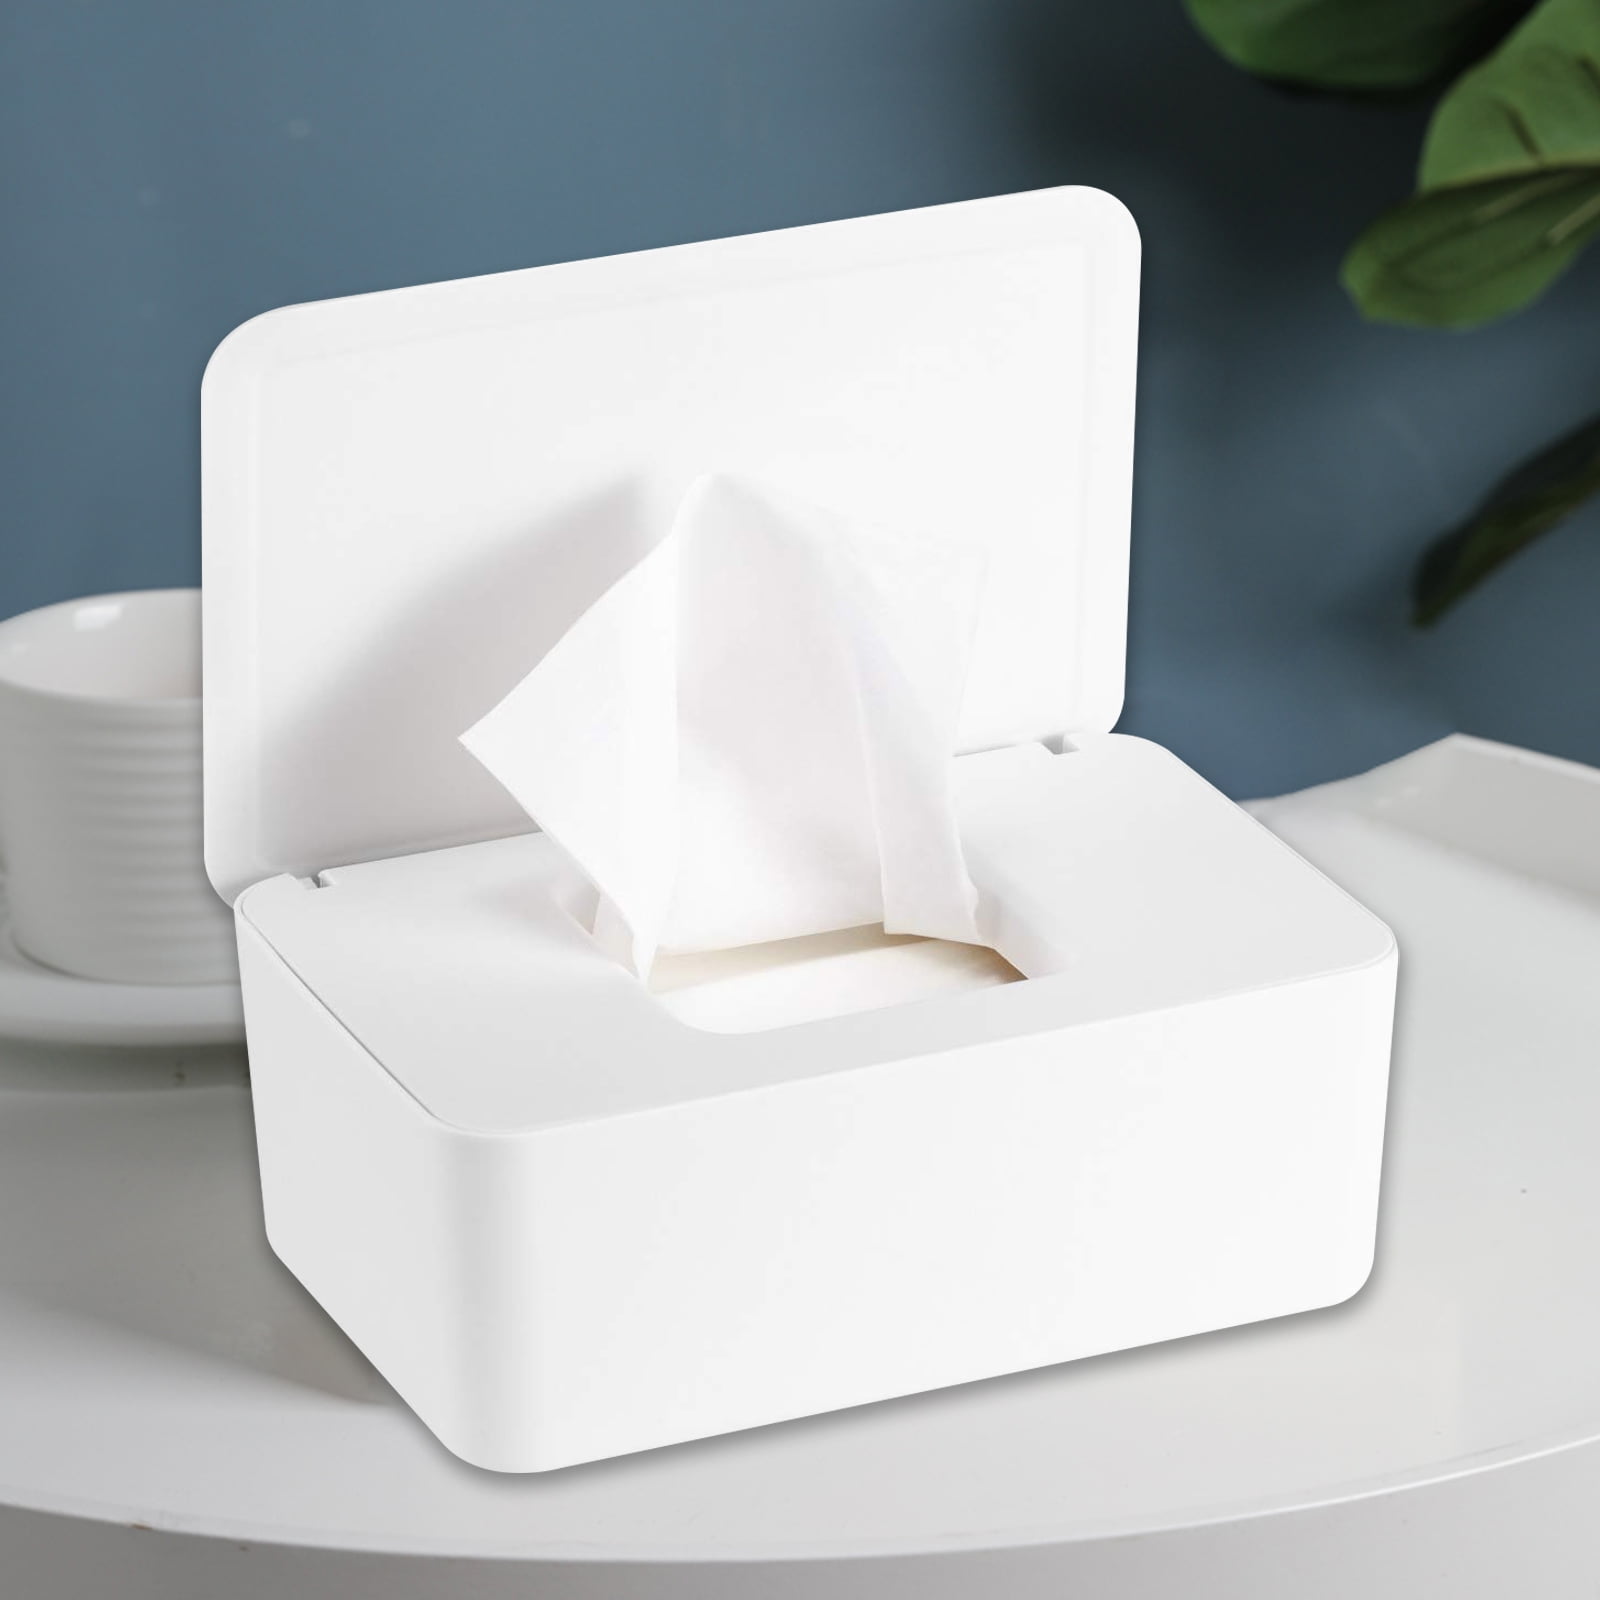 White Wet Wipes Storage Box Wipes Dispenser Holder Tissue Storage Box Case with Lid Dustproof for Home Office 